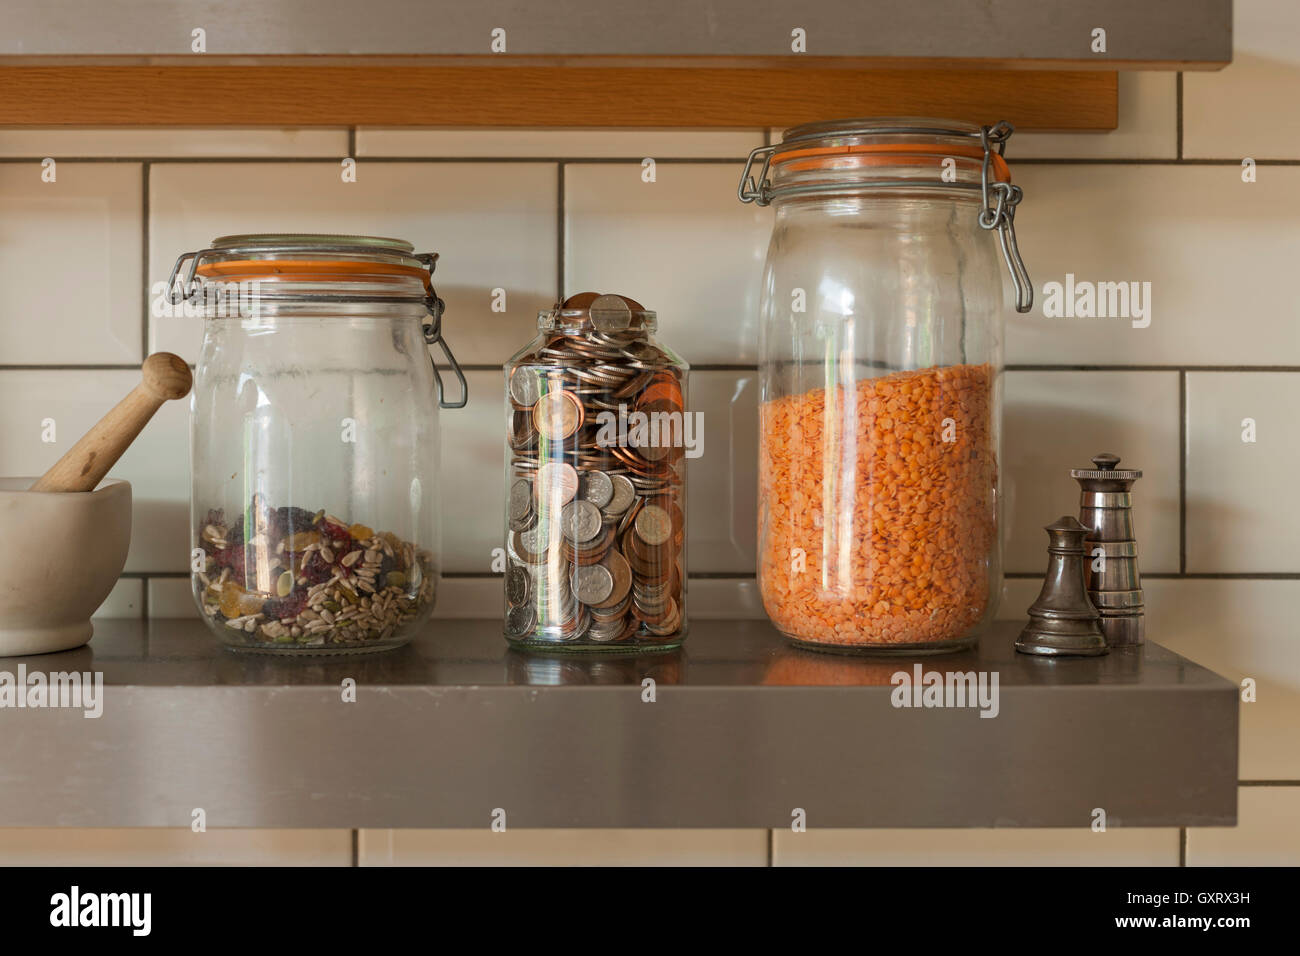 Jars of coins and ingredients on kitchen shelf Stock Photo